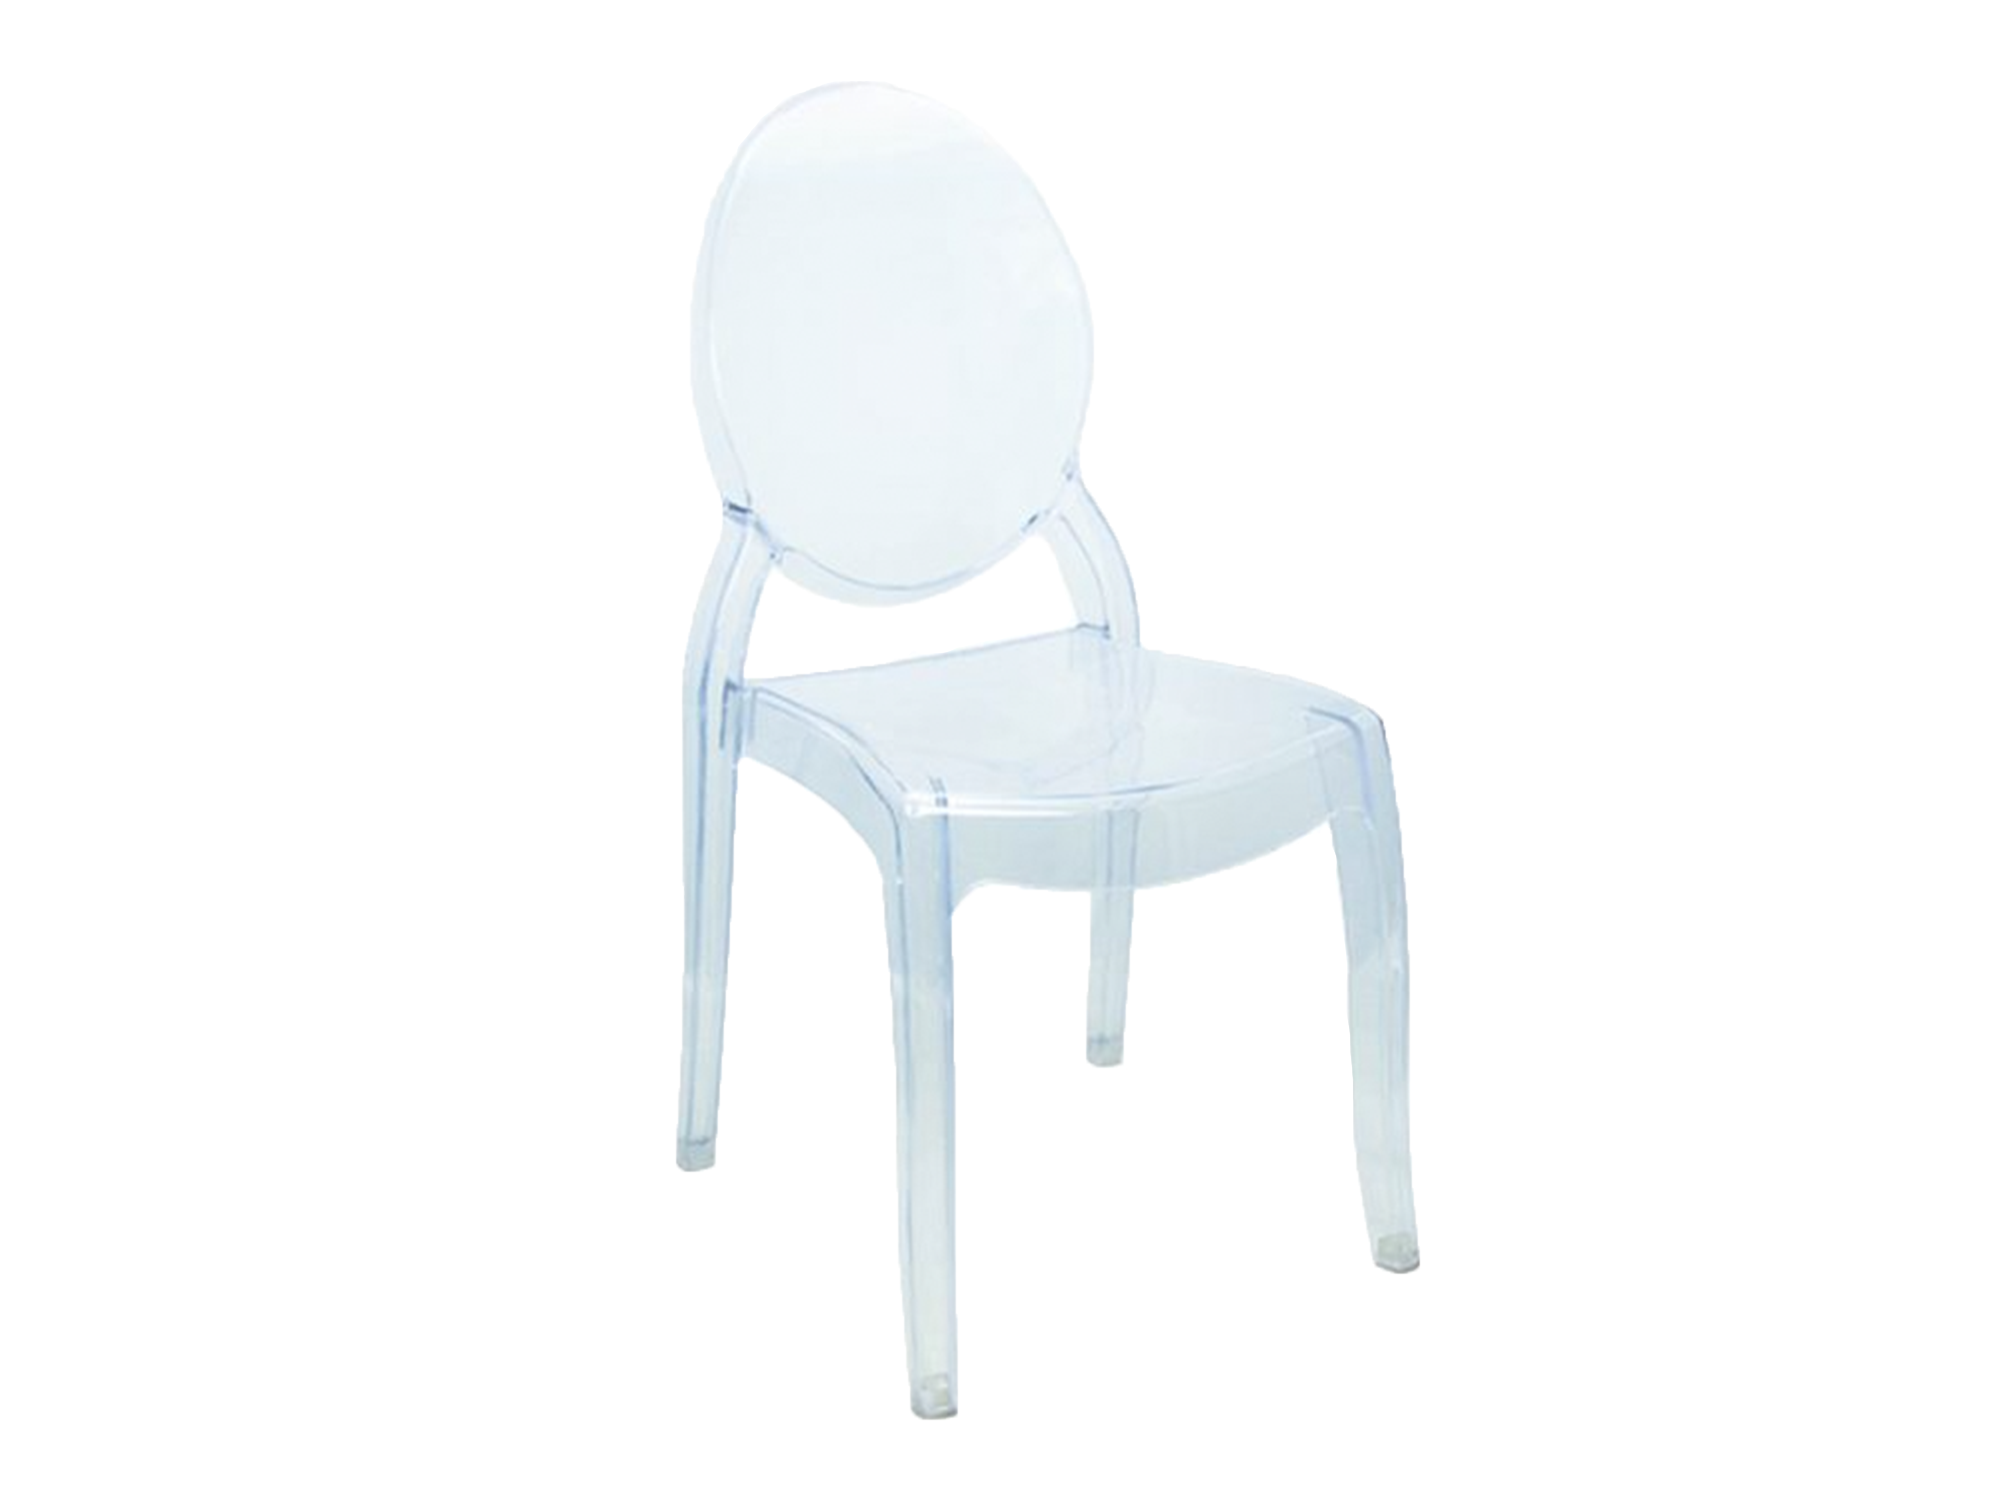 Ghost Chair Rentals